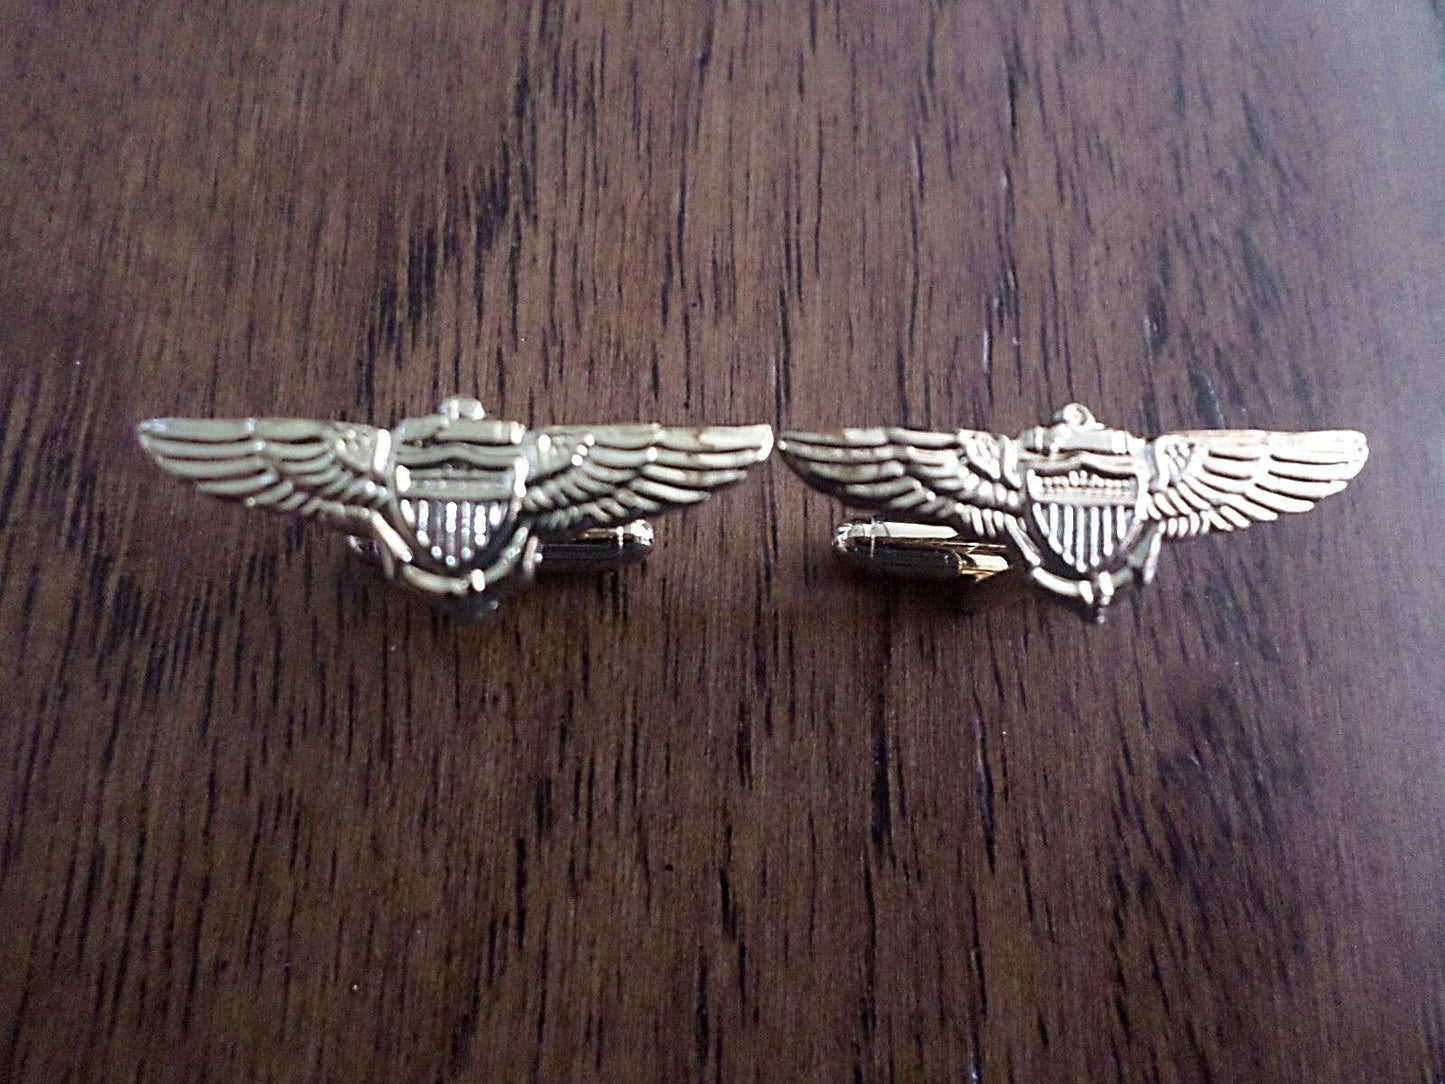 U.S MILITARY NAVY PILOT WINGS CUFFLINKS WITH JEWELRY BOX 1 SET CUFF LINKS BOXED